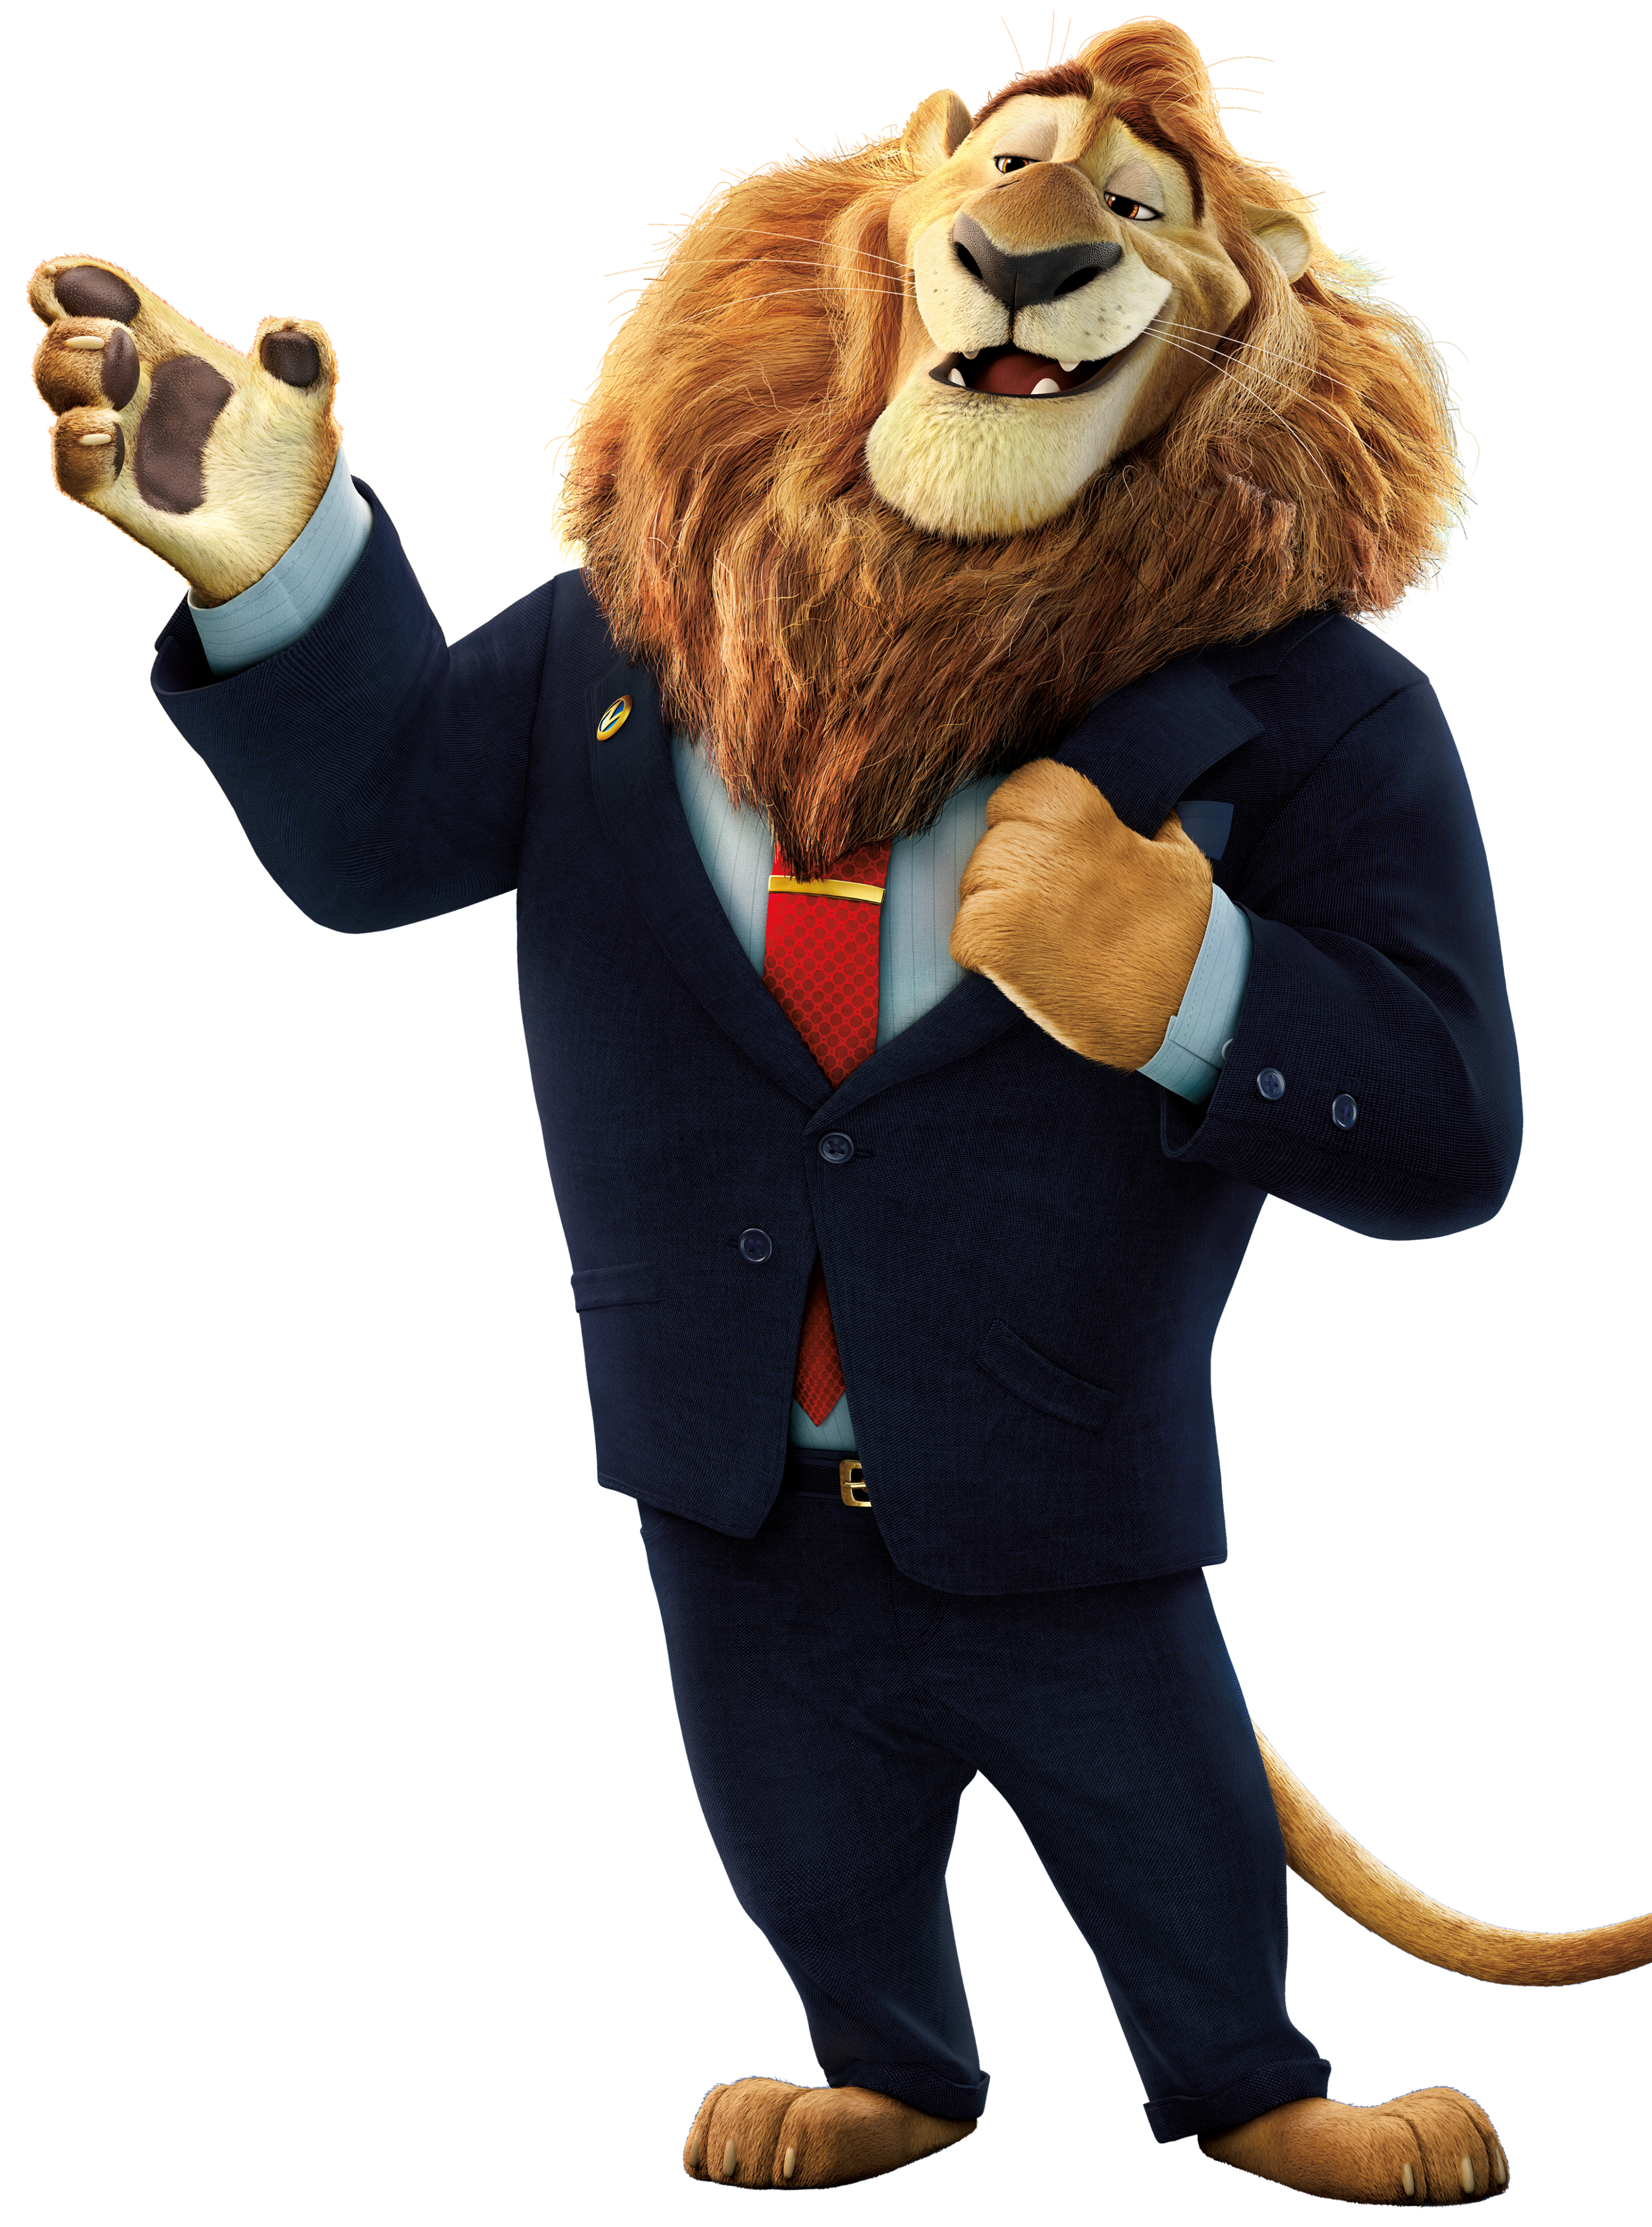 Zootopia Character Pack Mayor Lionheart And Lemming Businessman